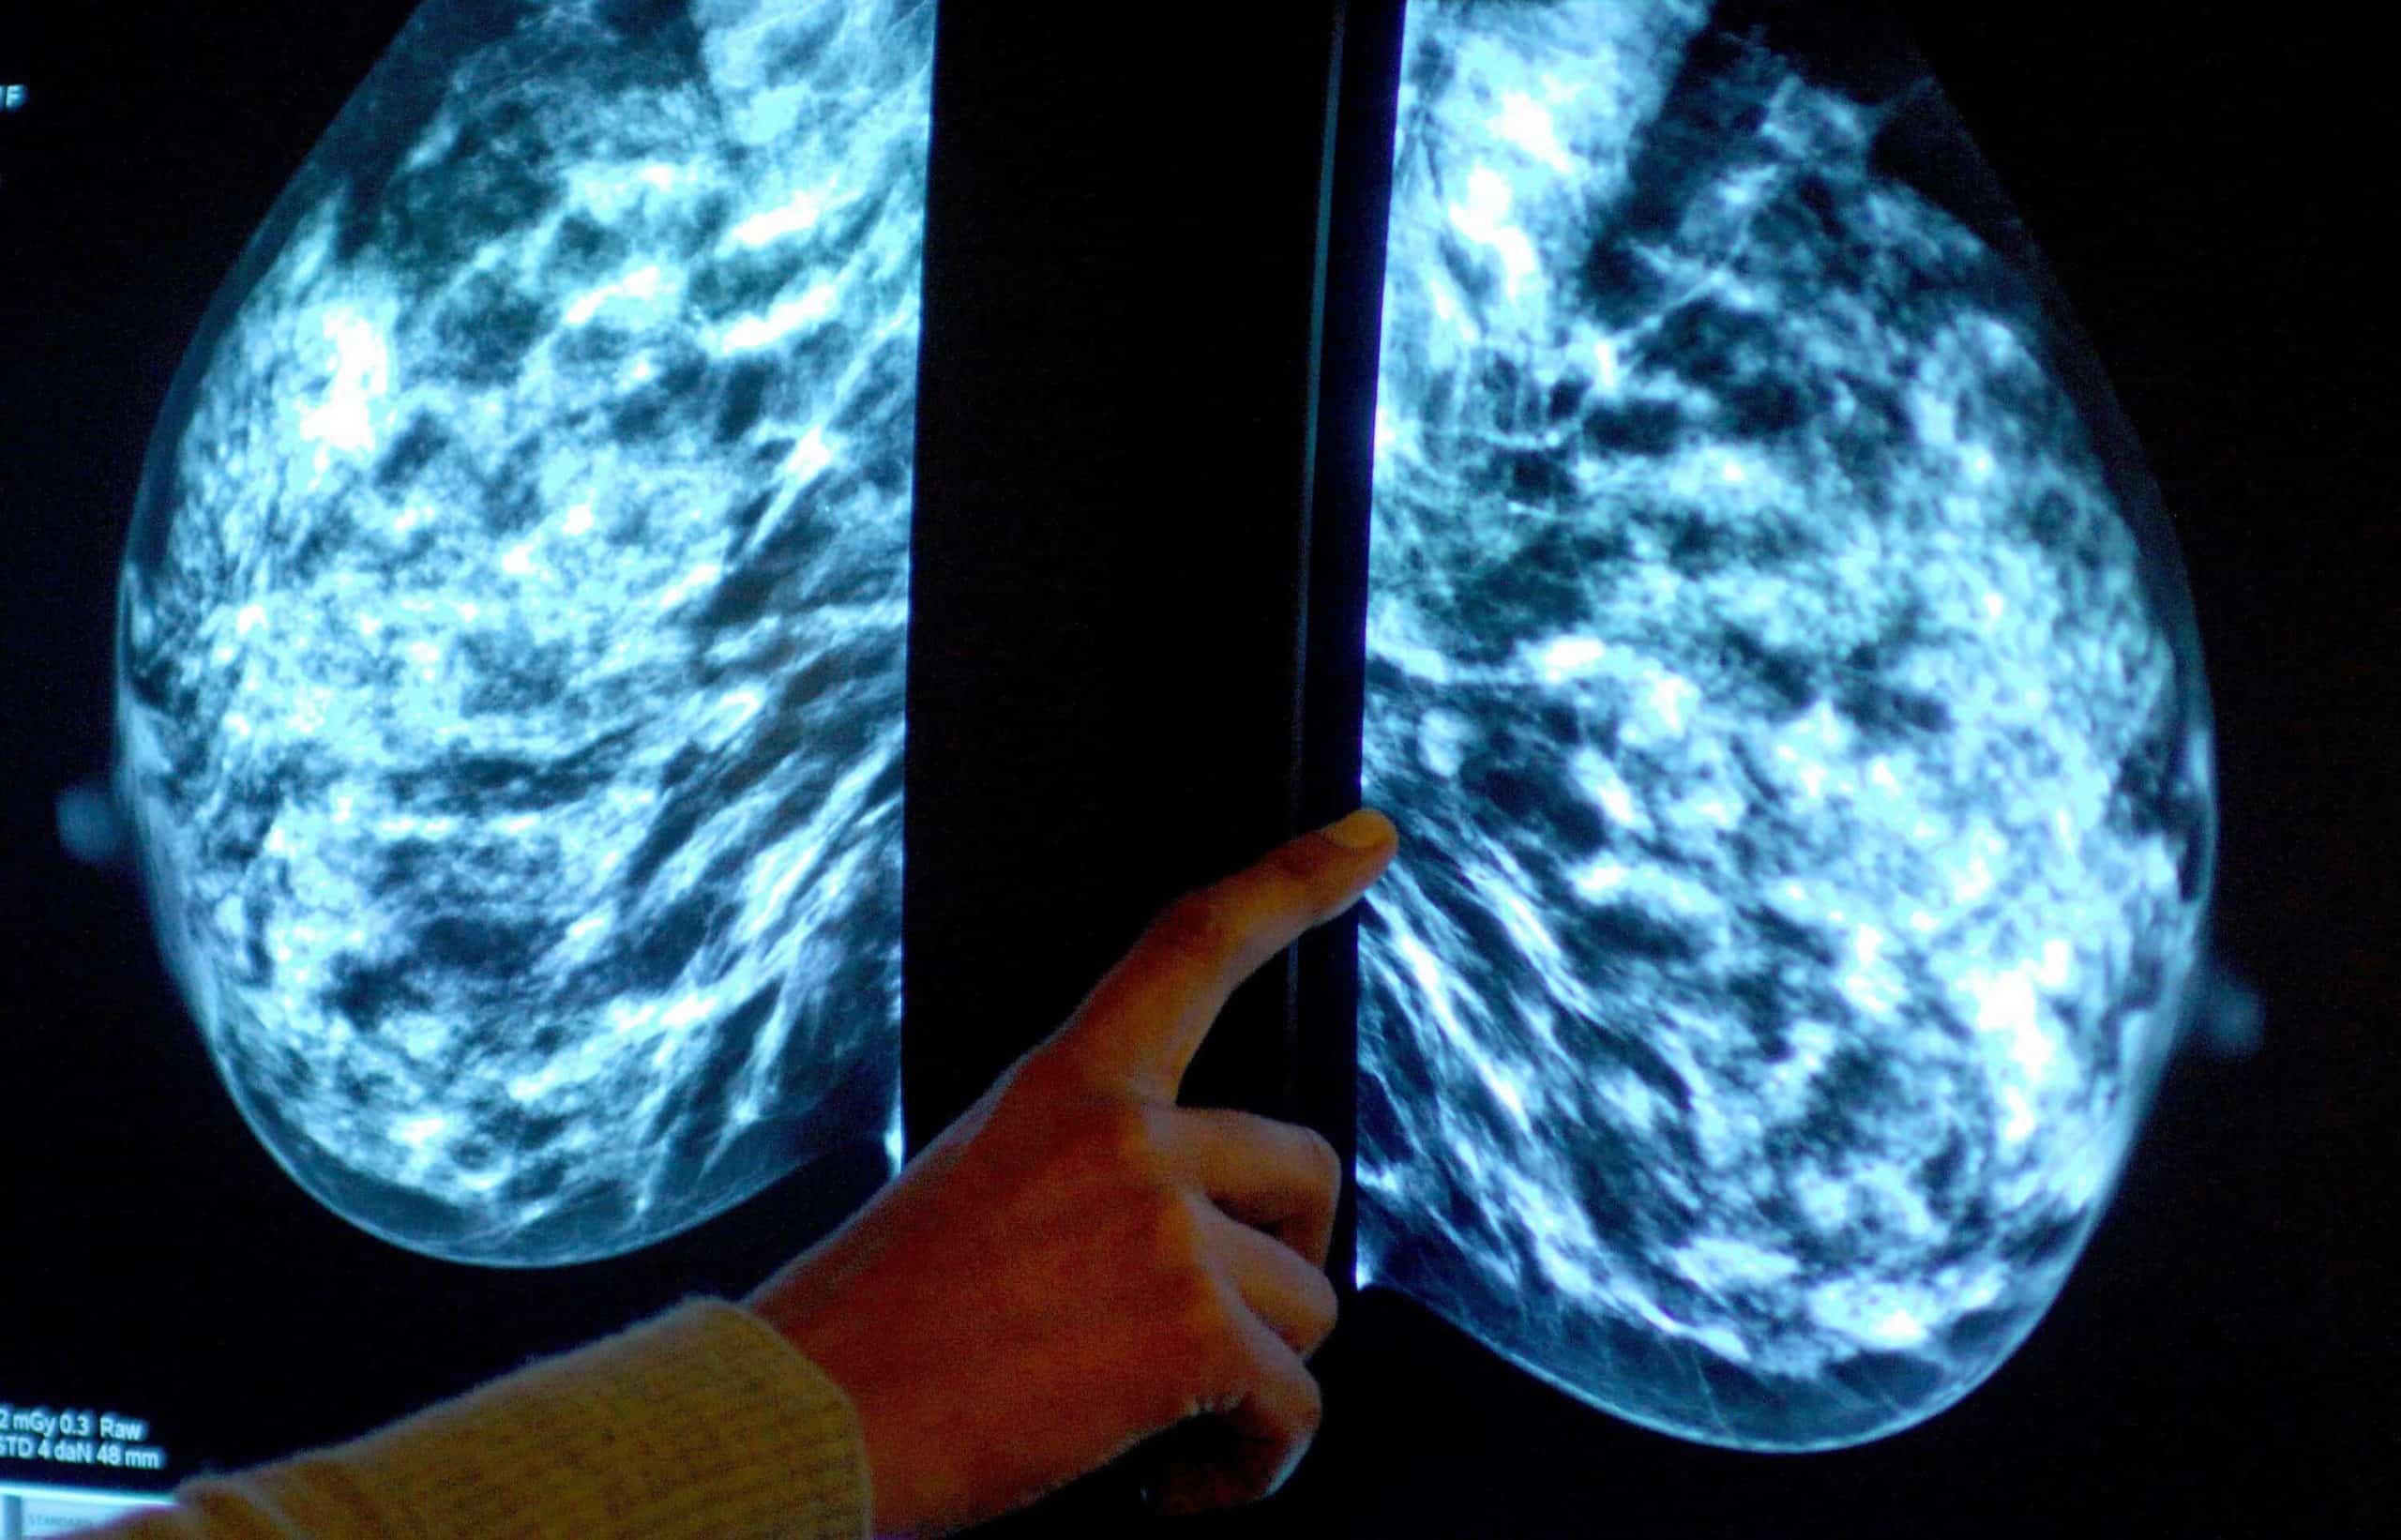 New drug overcomes resistance in aggressive breast cancers, study suggests